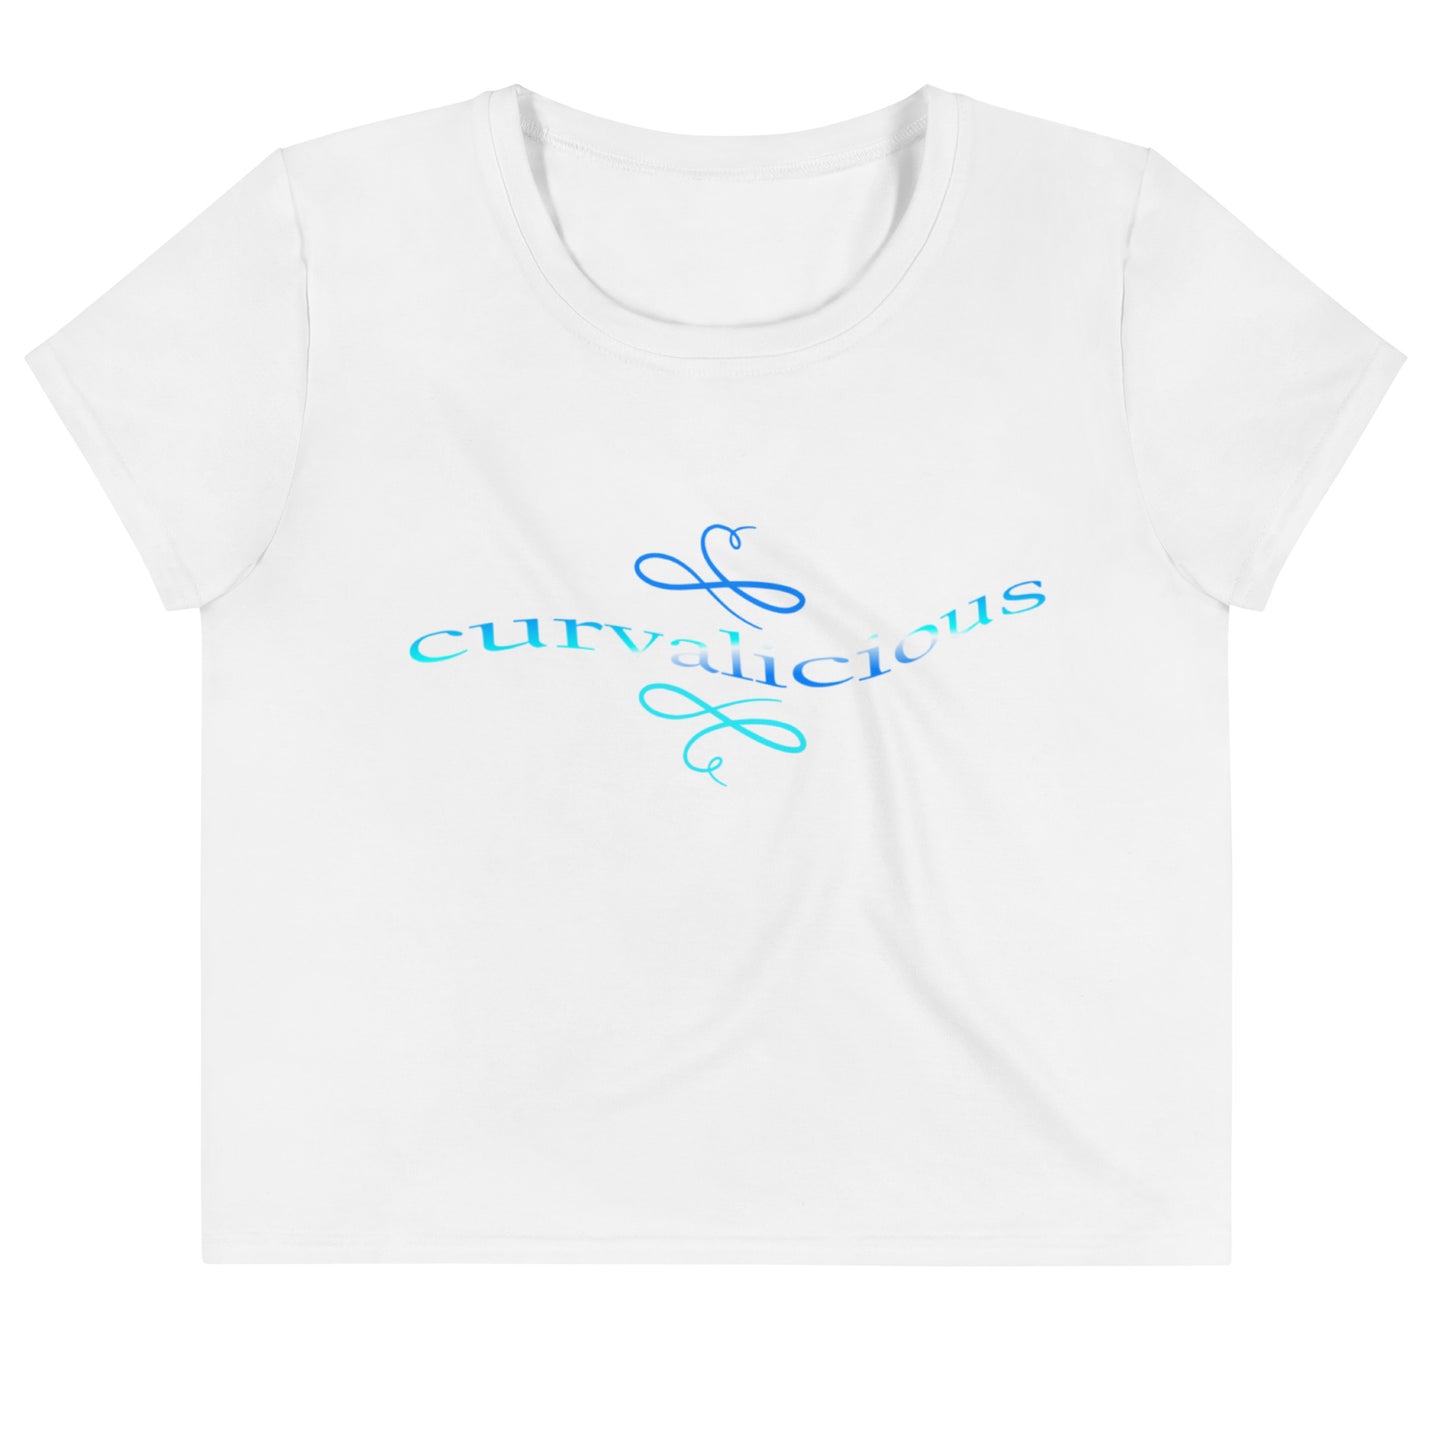 Crop Tee: Curvalicious (text in shades of blue)